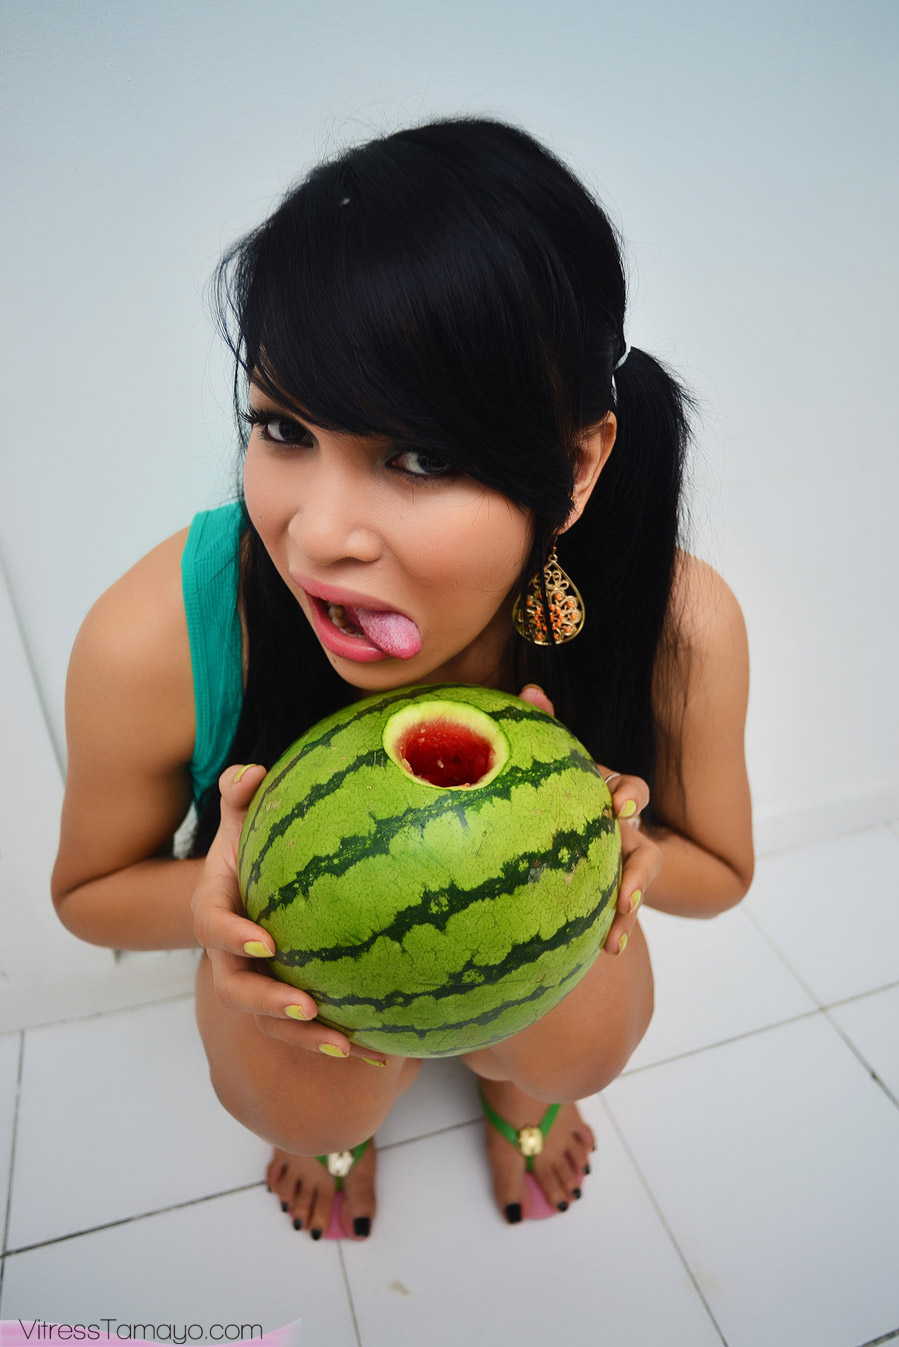 899px x 1347px - Petite Asian shemale with Big Tits fucking a watermelon - ShemaleTubeVideos